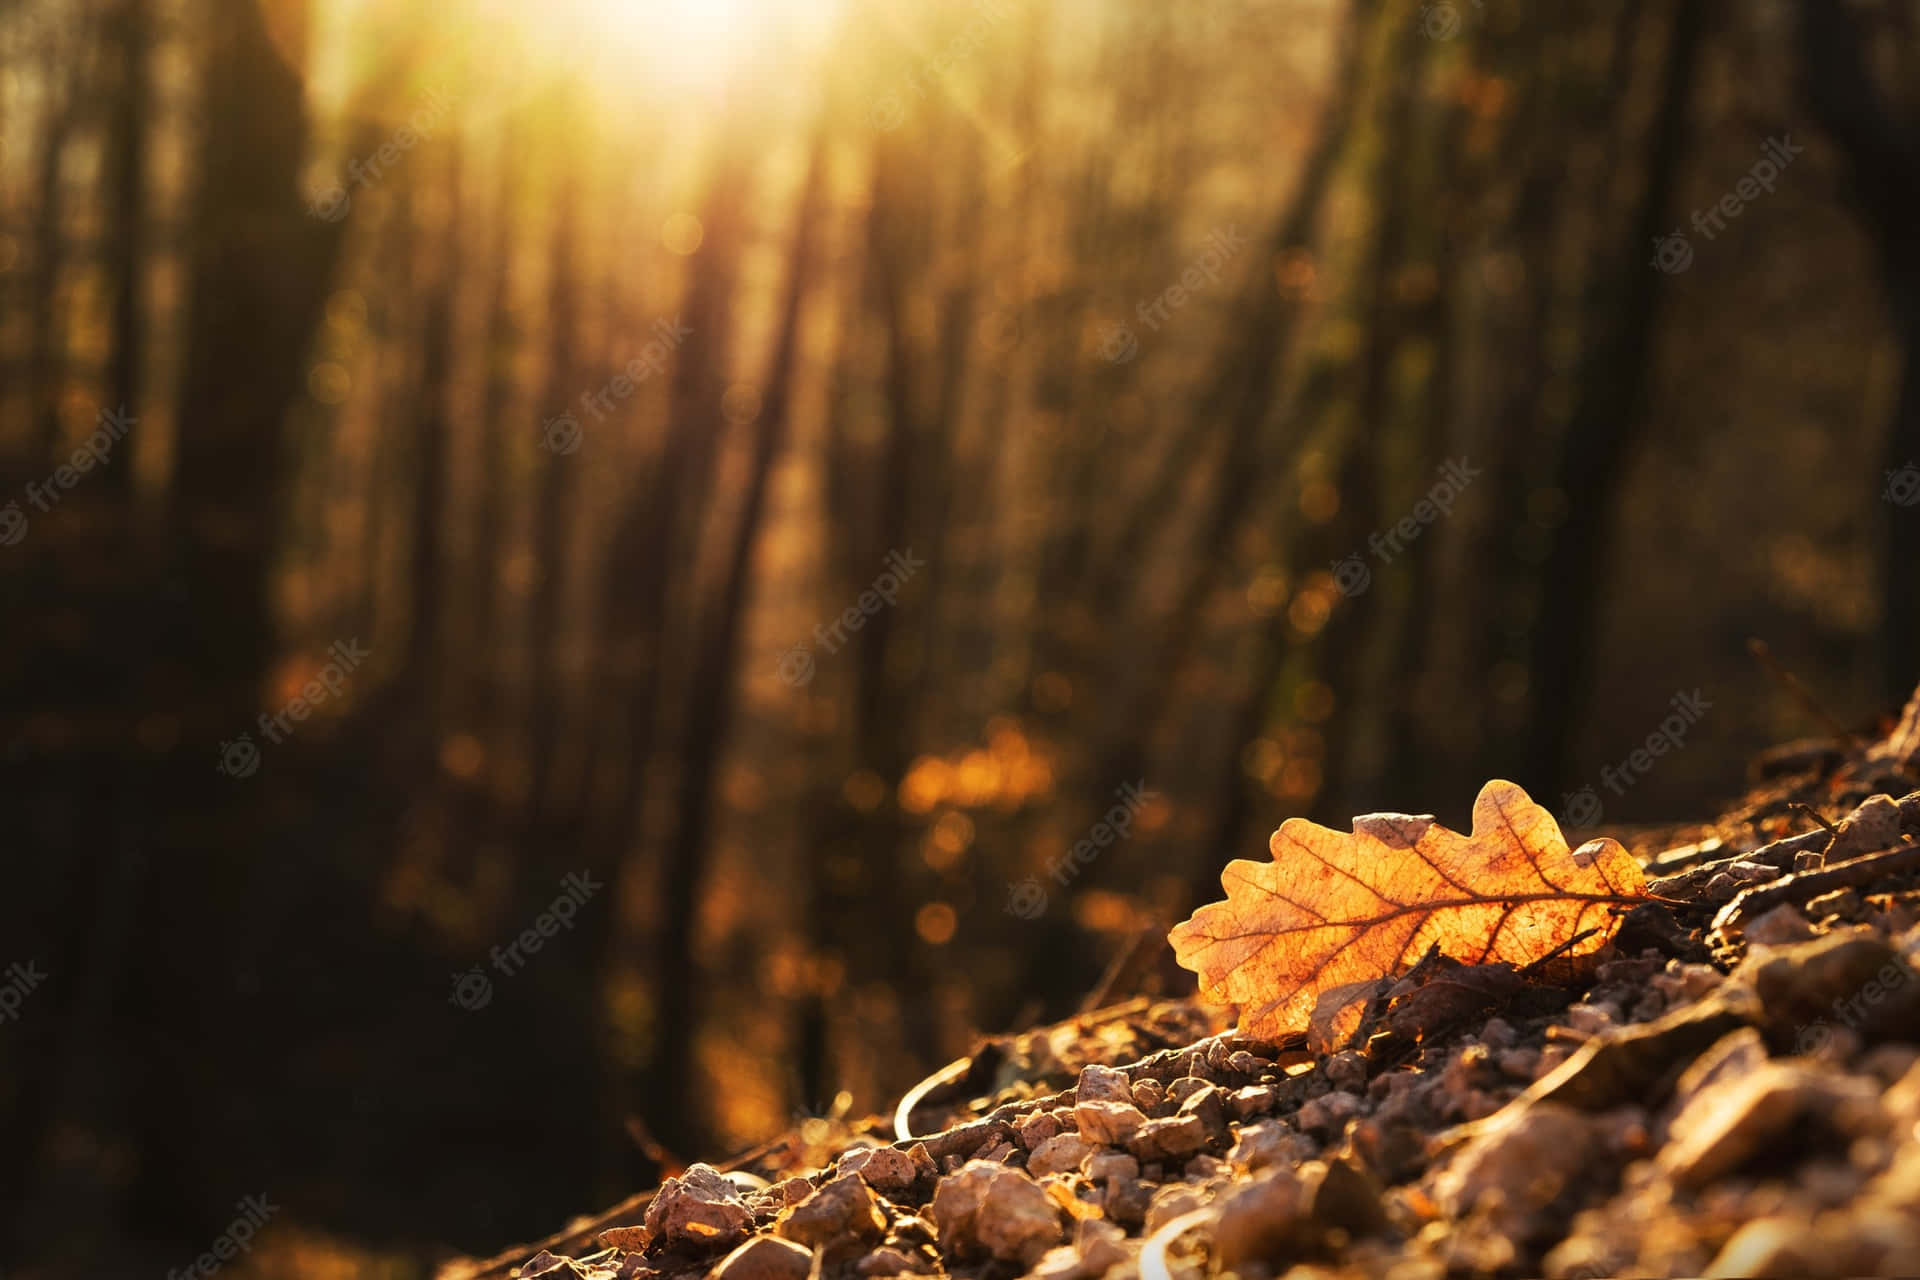 Fall Sunset: A breathtaking landscape of trees and golden skies Wallpaper